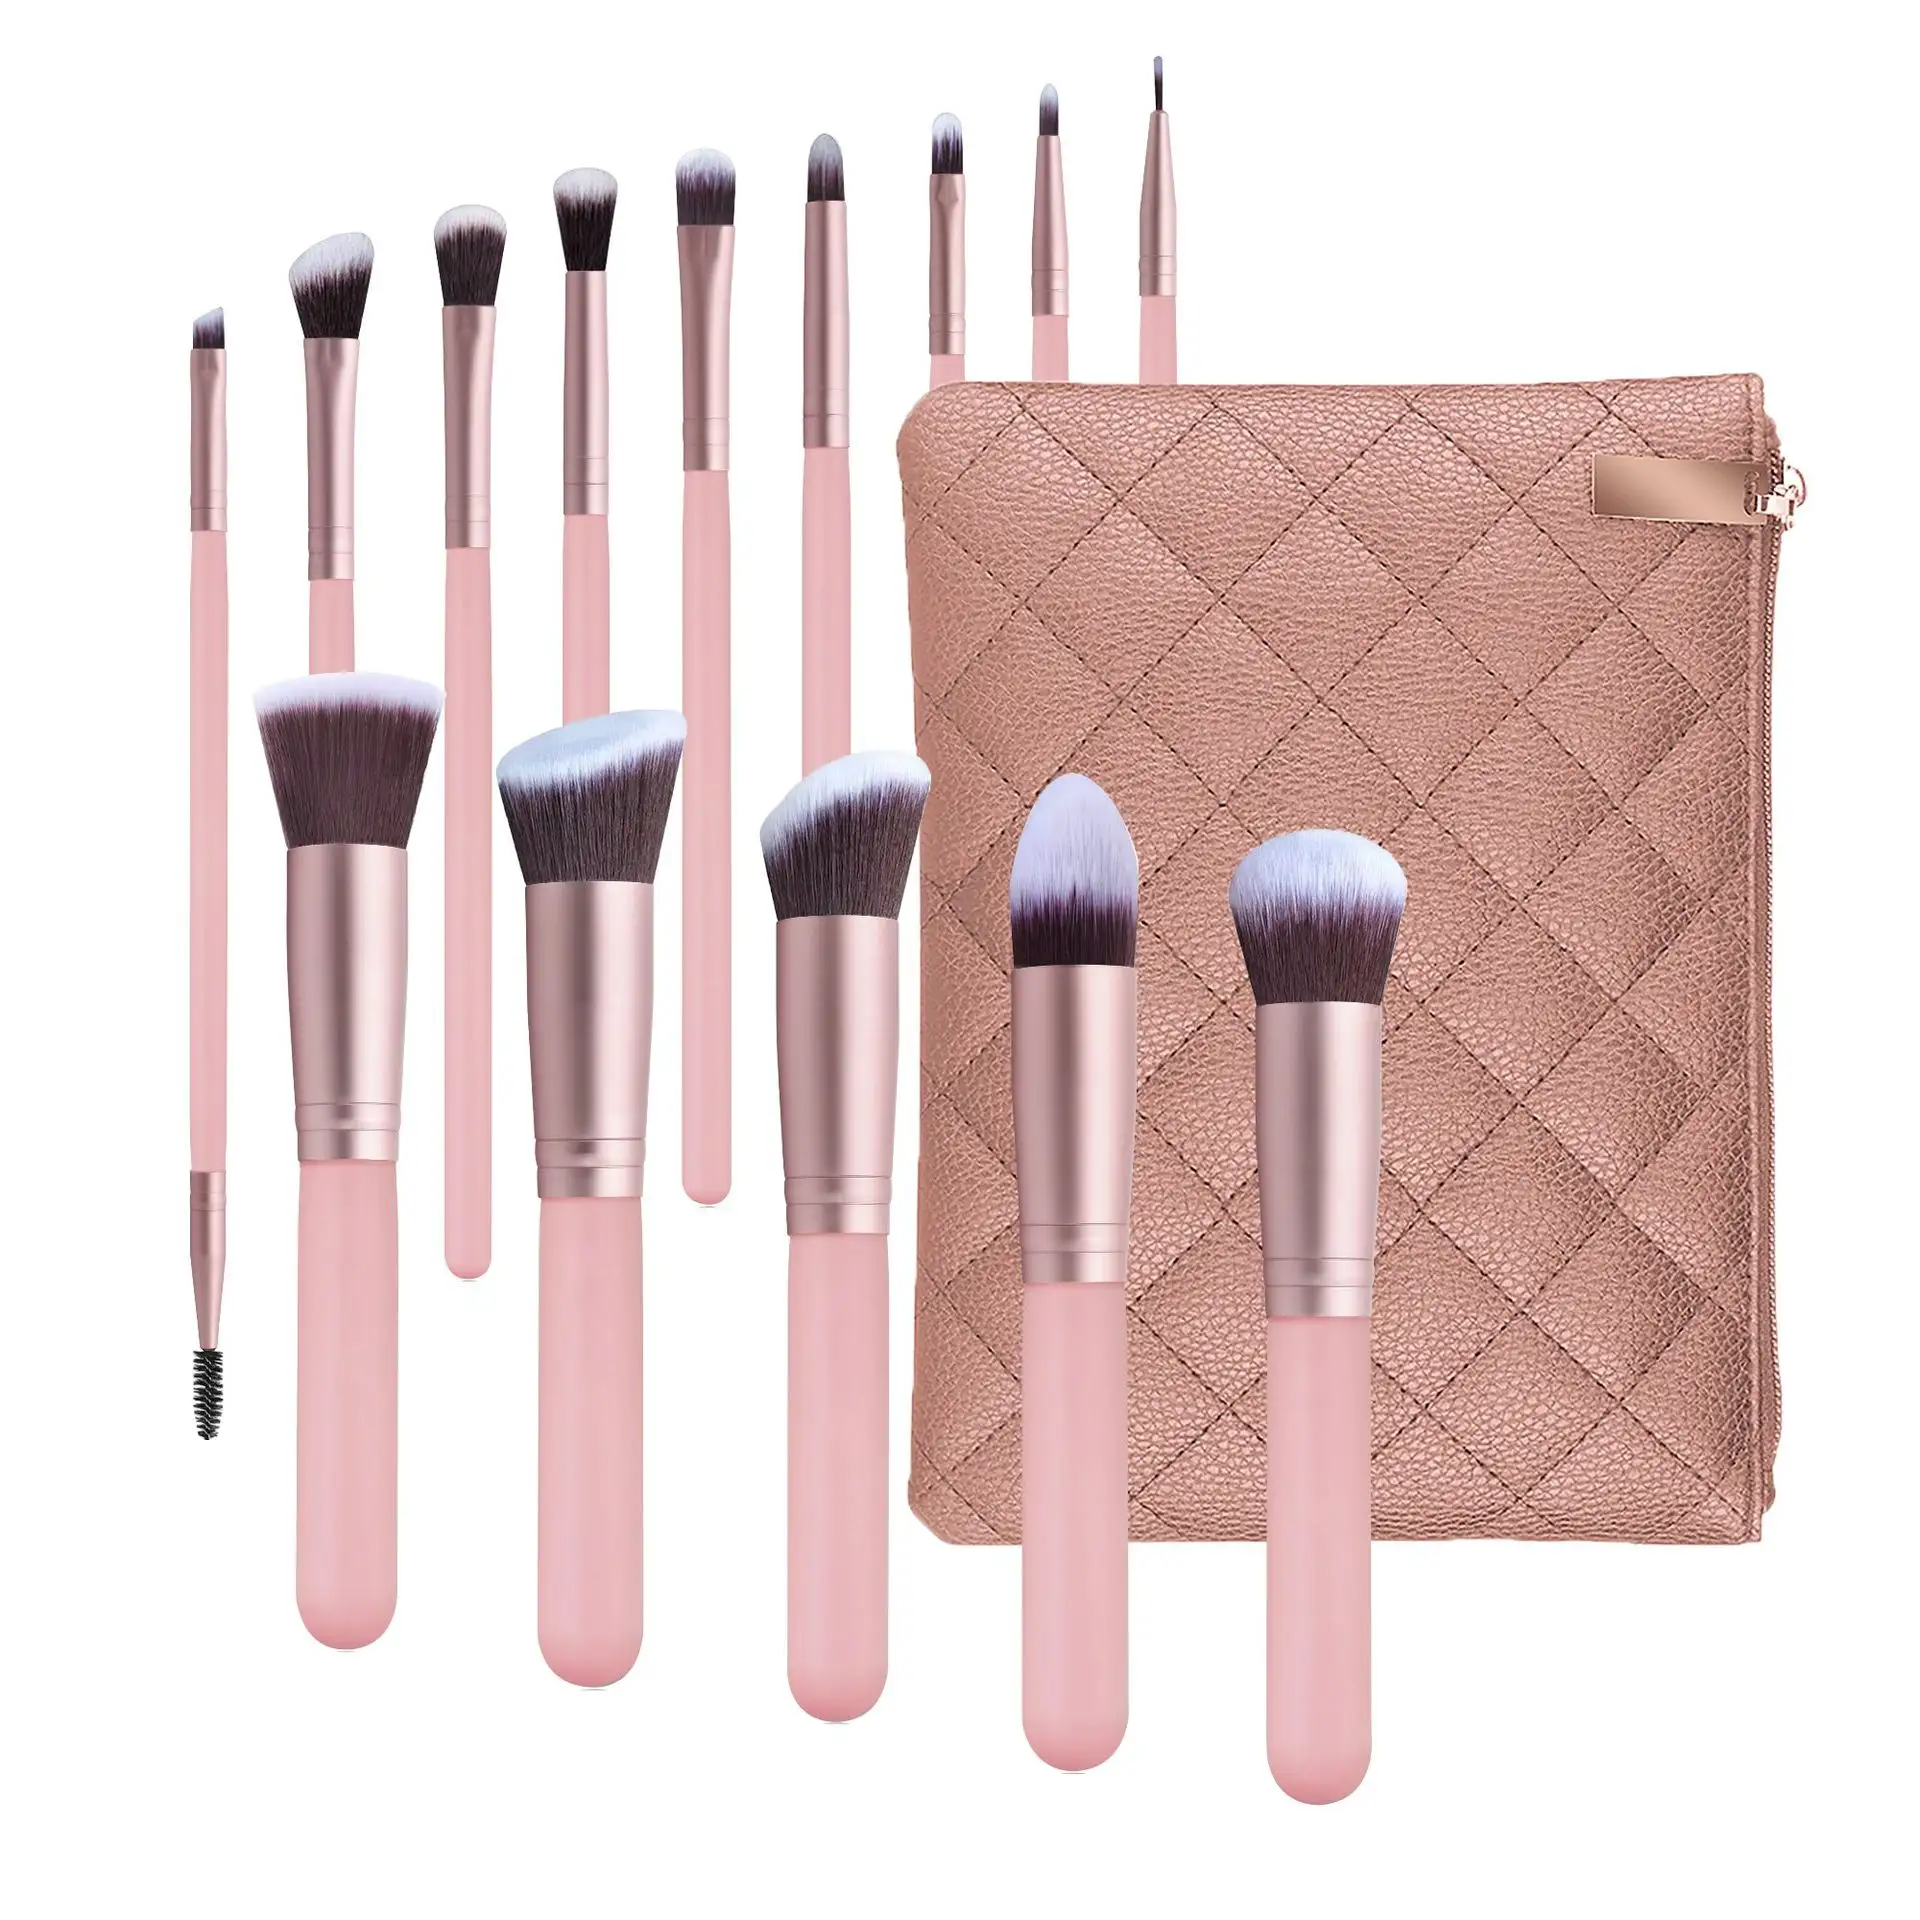 Top sale popular pink 14pcs make up brushes girls beauty tools face eye shadow foundation brush set with bag